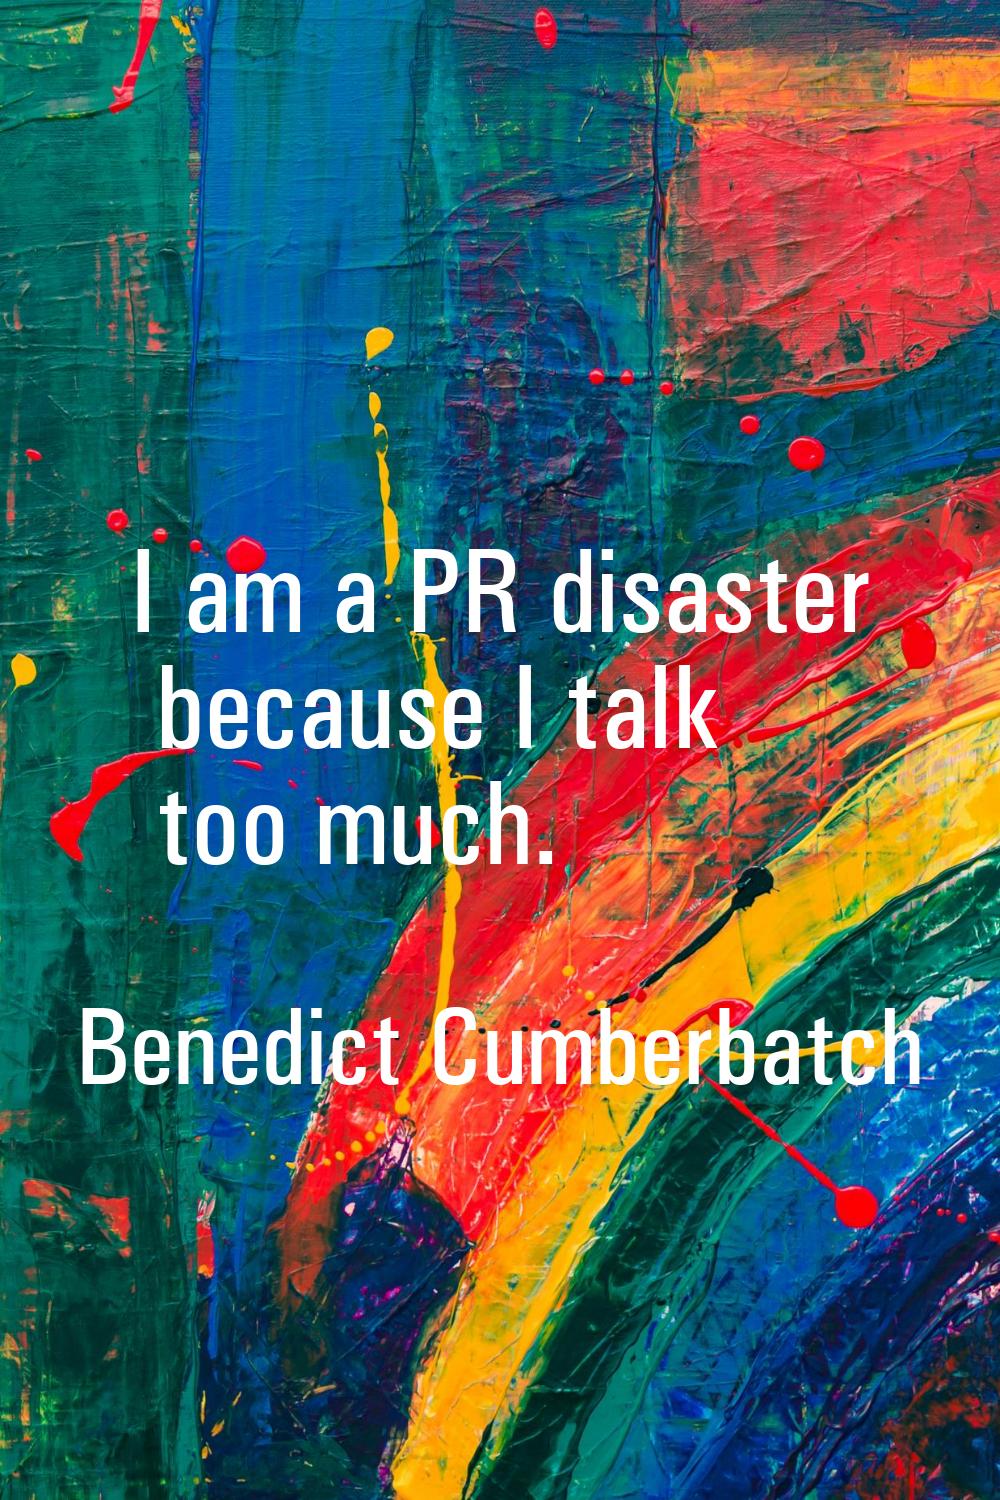 I am a PR disaster because I talk too much.